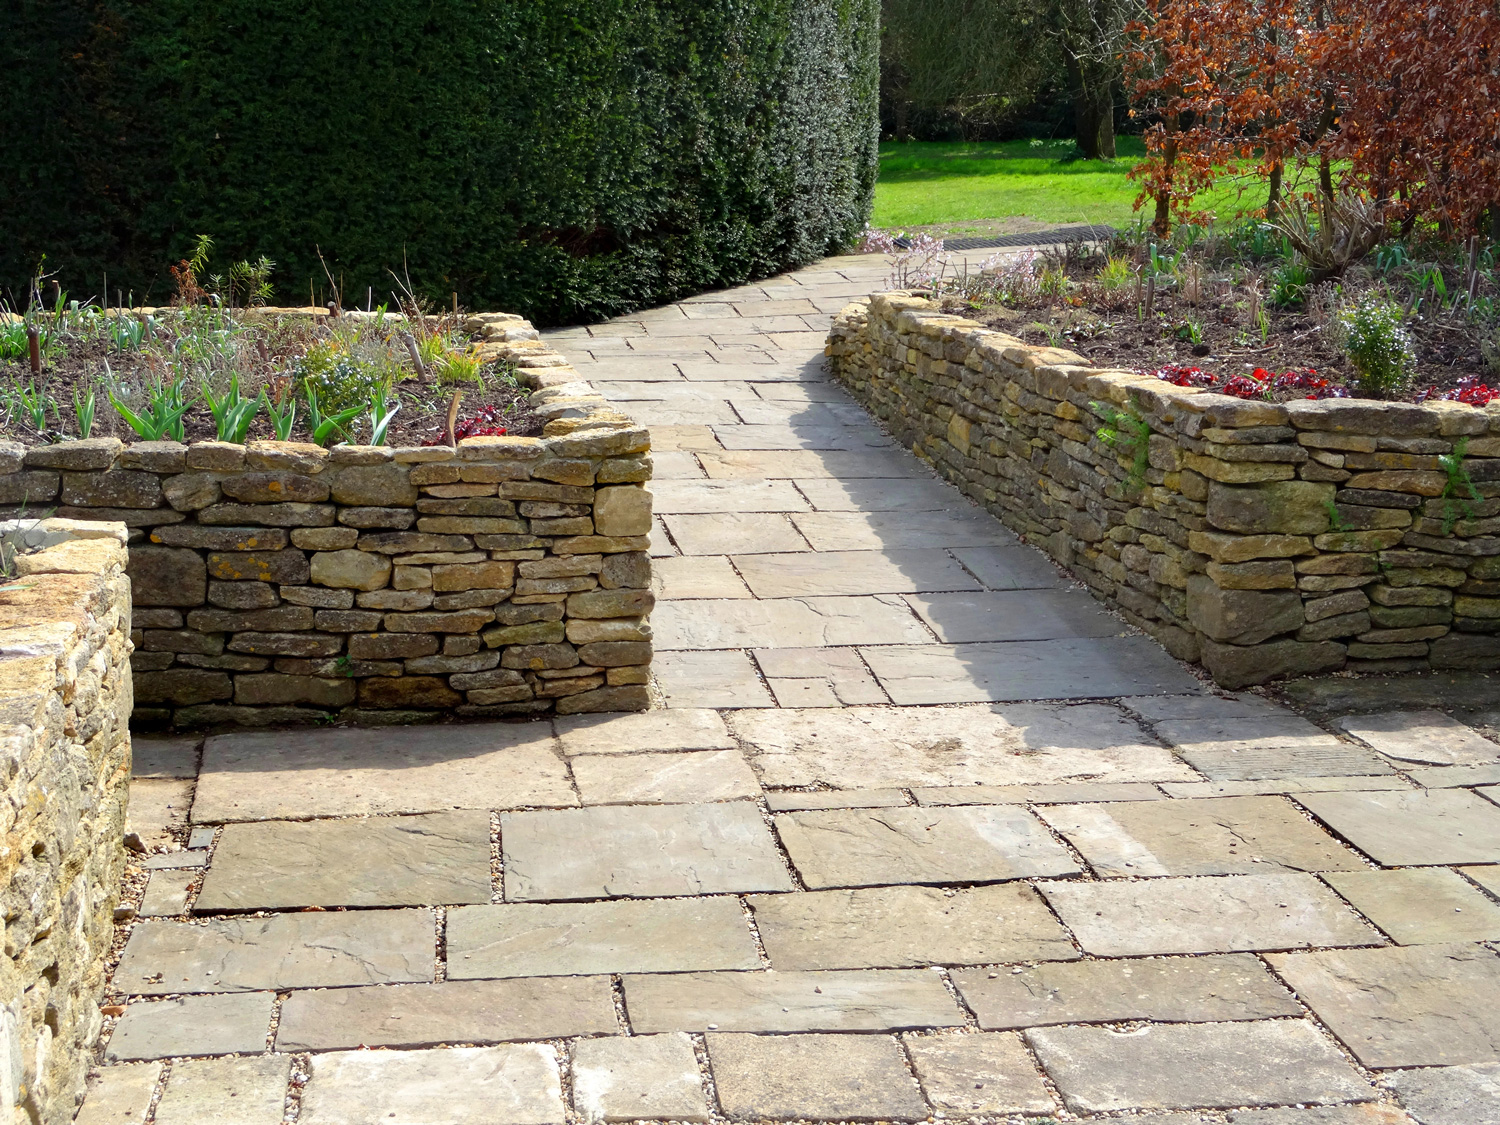 Photo showing a sunken garden with raised beds made from dry-stone walls and a patio of flagstone paving. The garden is designed to be accessible for gardeners in wheelchairs, with the sloped pathway leading to the flowerbeds.